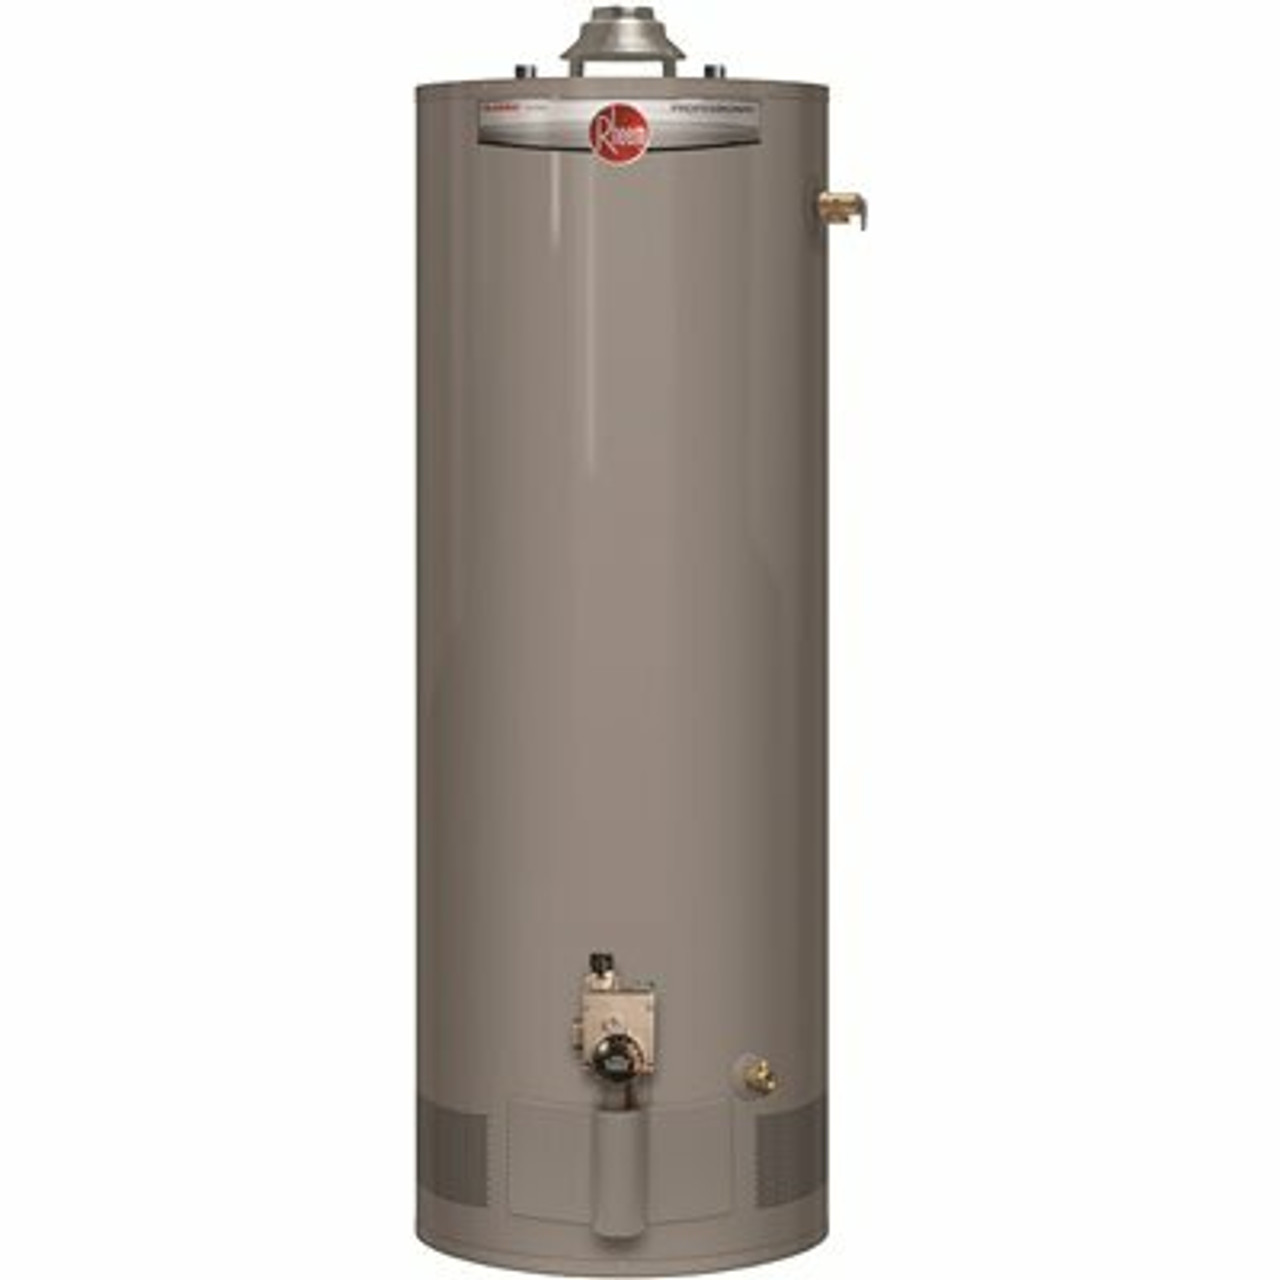 Rheem Professional Classic 50 Gal. Tall 6-Year Warranty Natural Gas Atmospheric Tank Water Heater With Top T And P Valve - 3584633